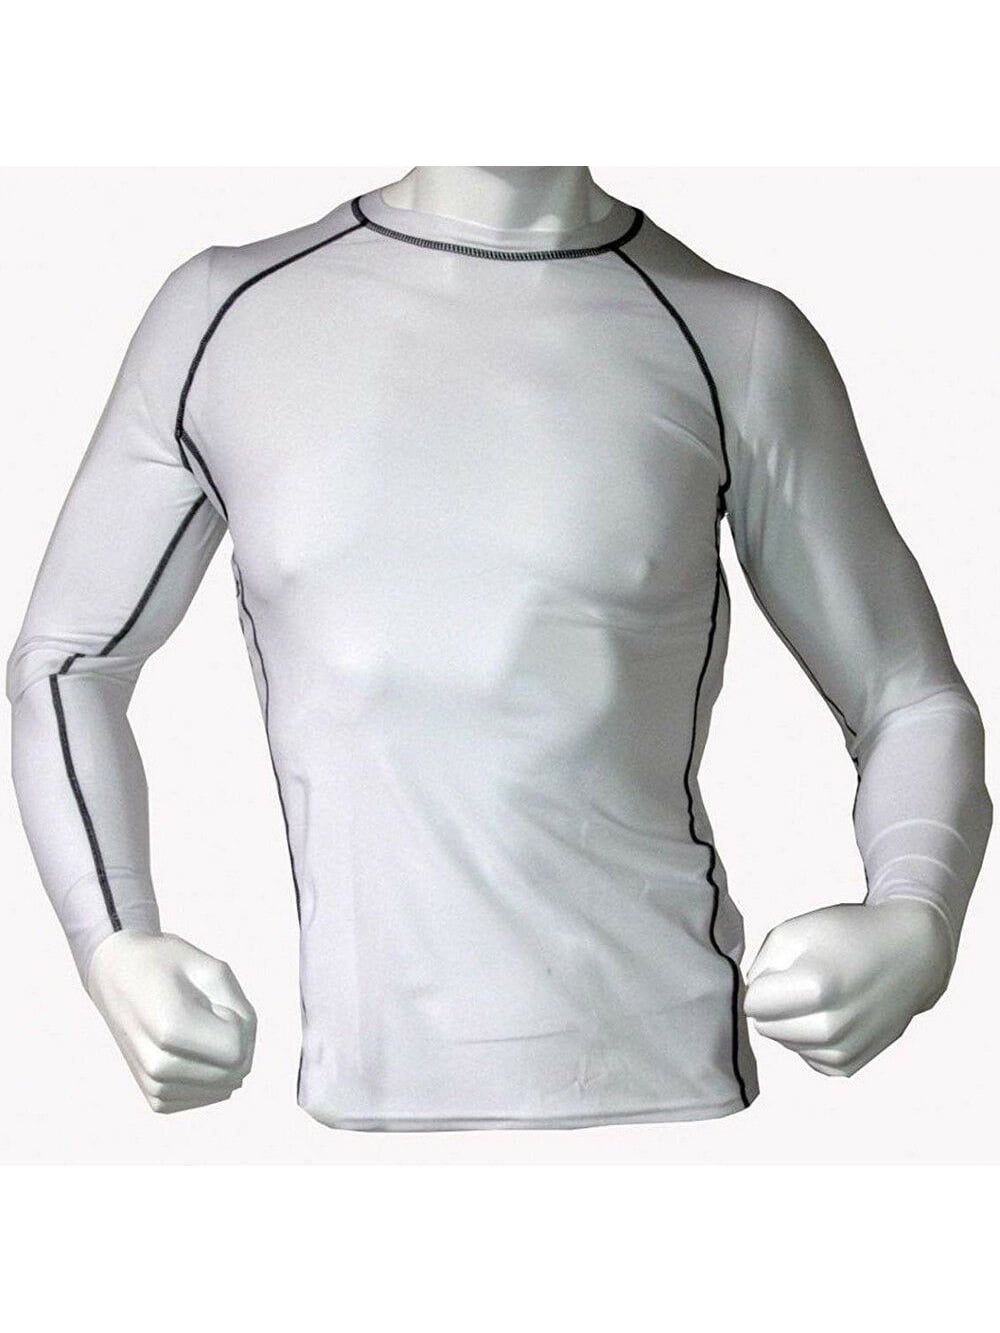 Mens Compression Armour Base layer Top Skin Fit Full Long Shirt Sleeve 